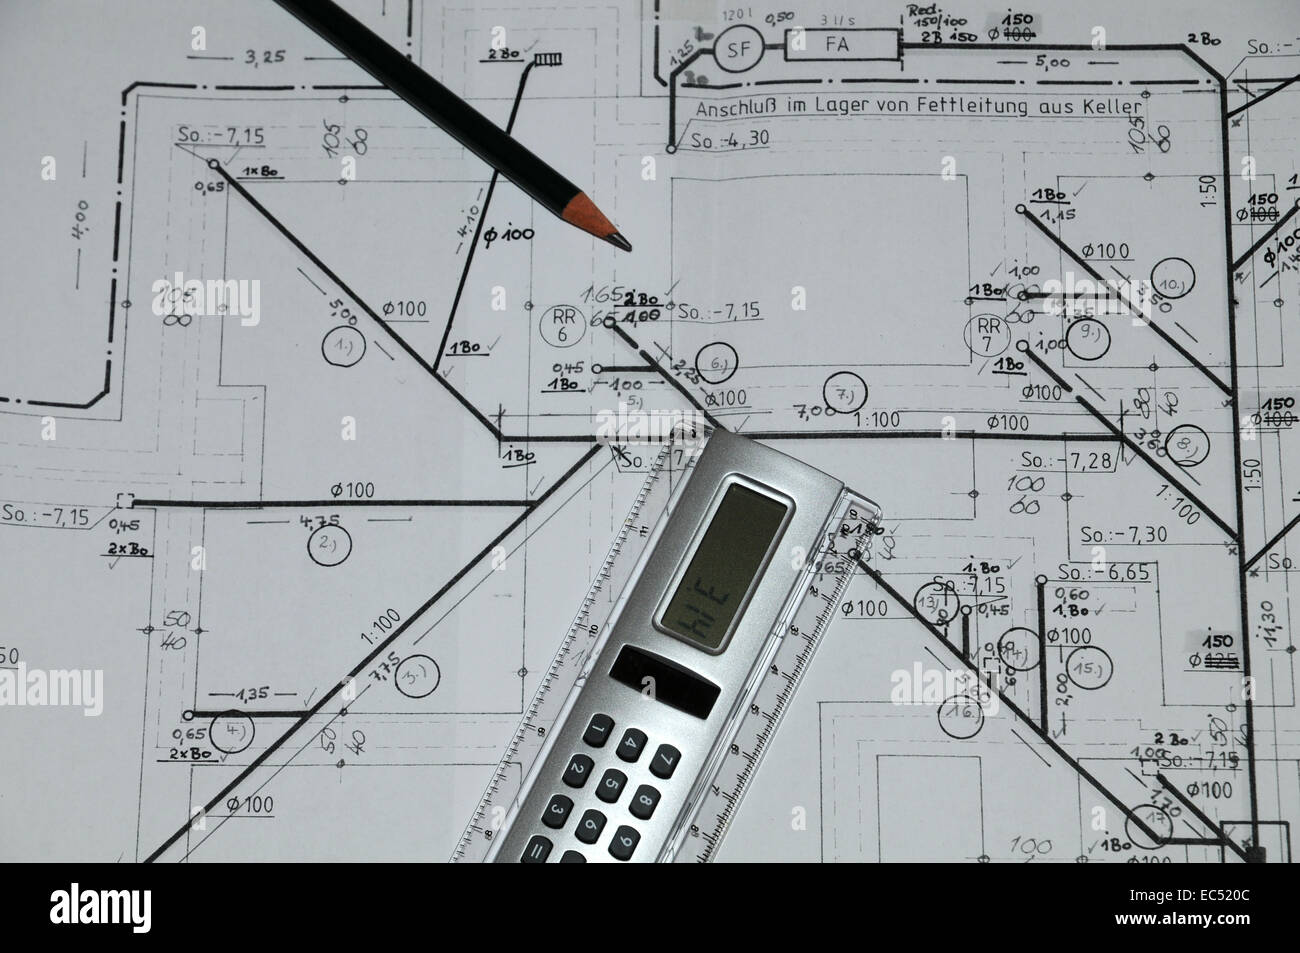 architectural drawing Stock Photo